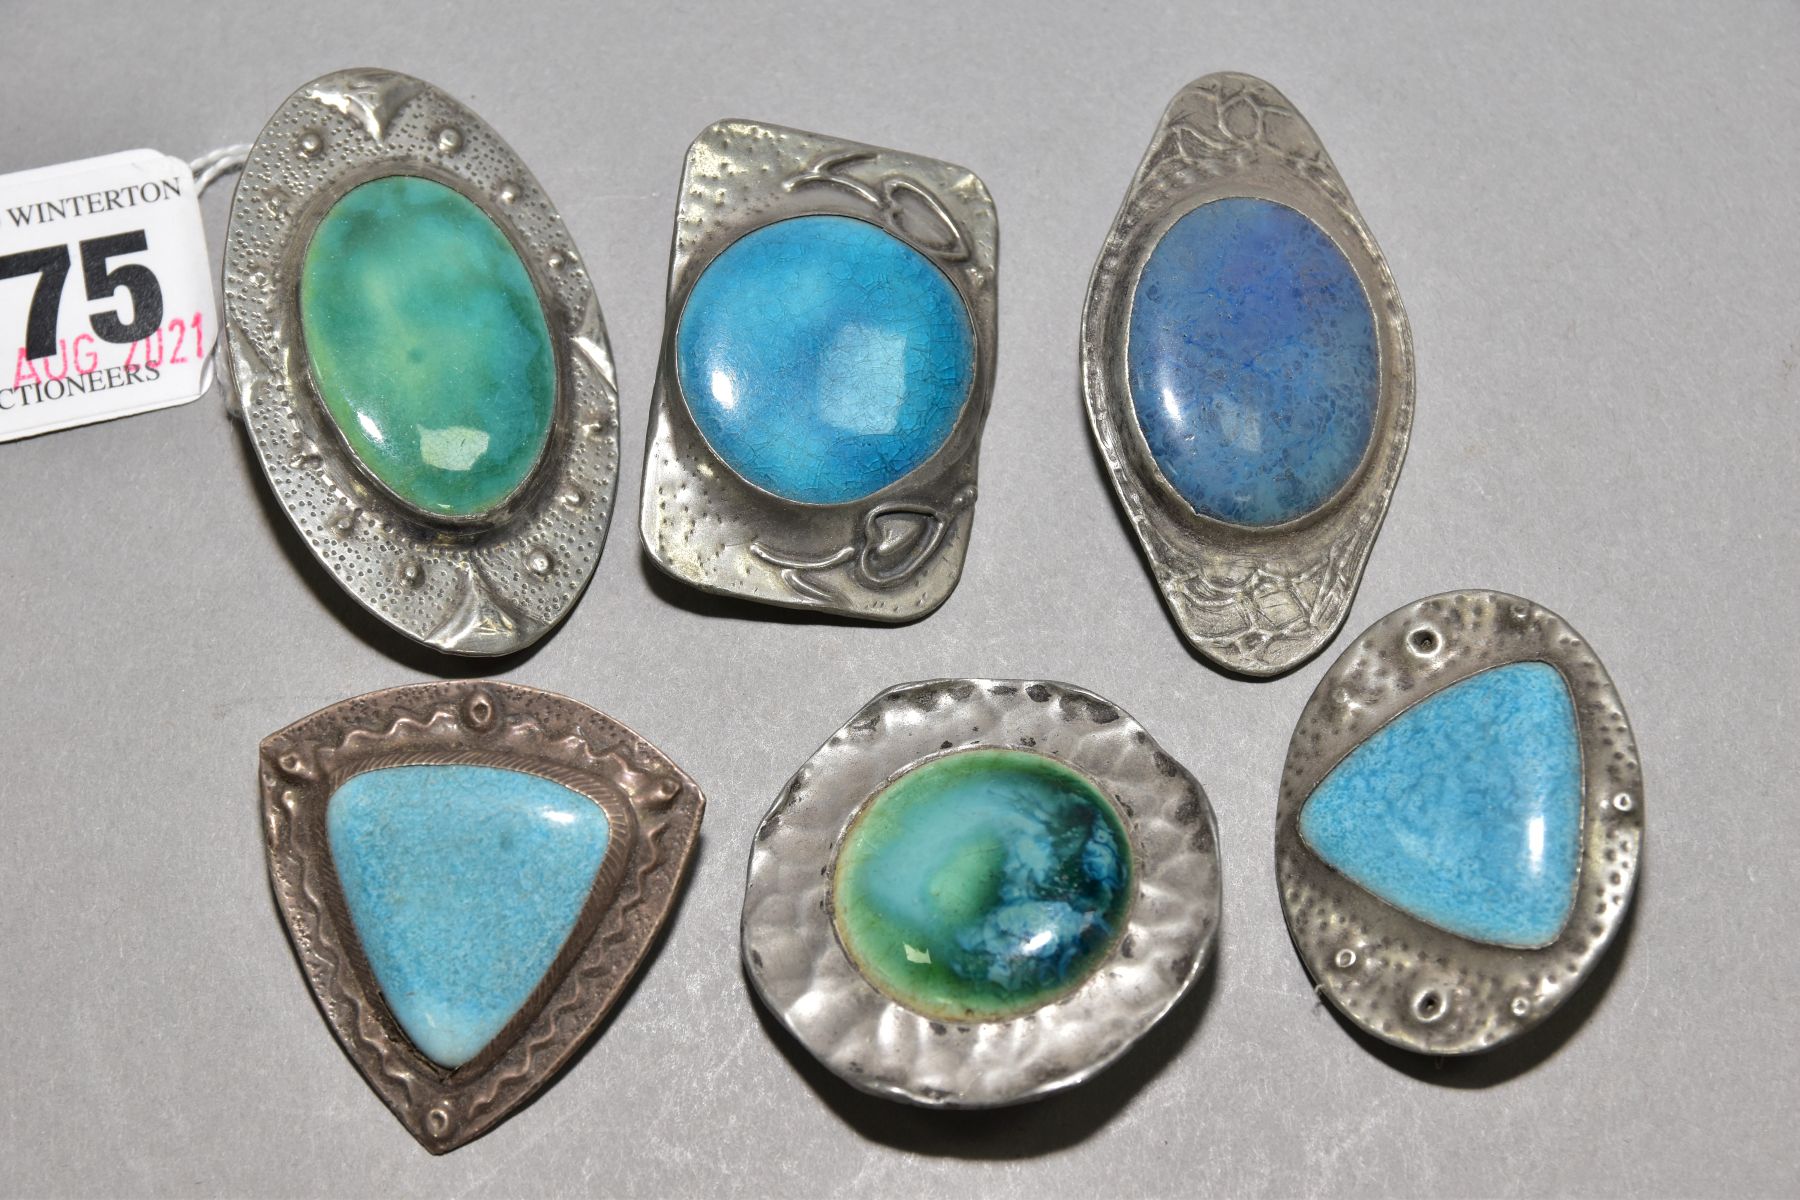 SIX RUSKIN STYLE BROOCHES, five enamels set into pewter, one stamped FTG hand wrought, one enamel